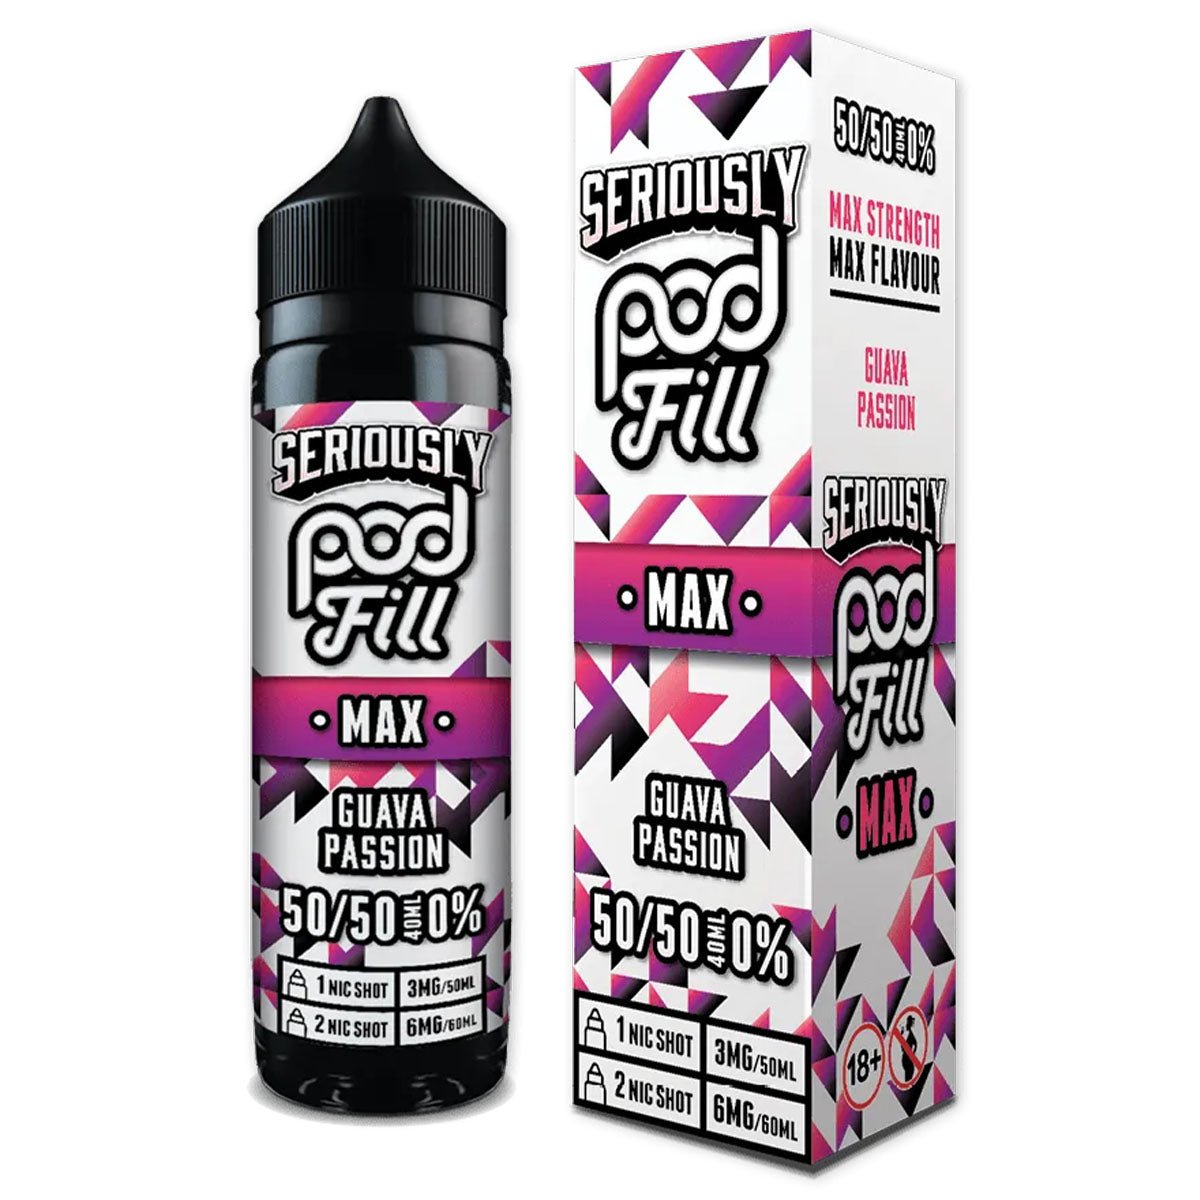 Guava Passion 40ml Longfill Concentrate By Seriously Pod Fill Max - Prime Vapes UK